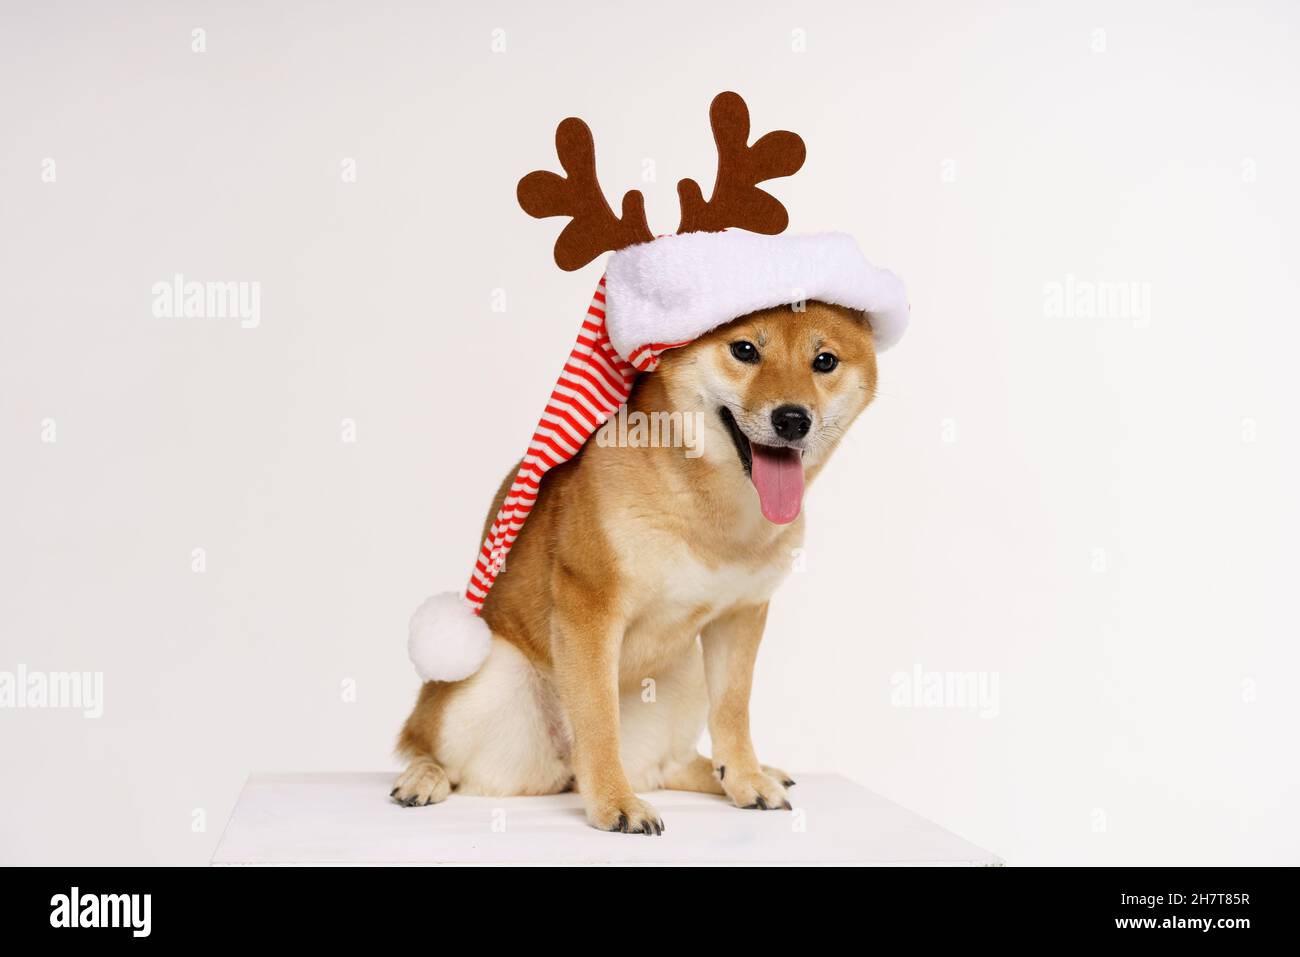 New year christmas dog breed red bow antlers light background isolate red with white. Pet for christmas Stock Photo